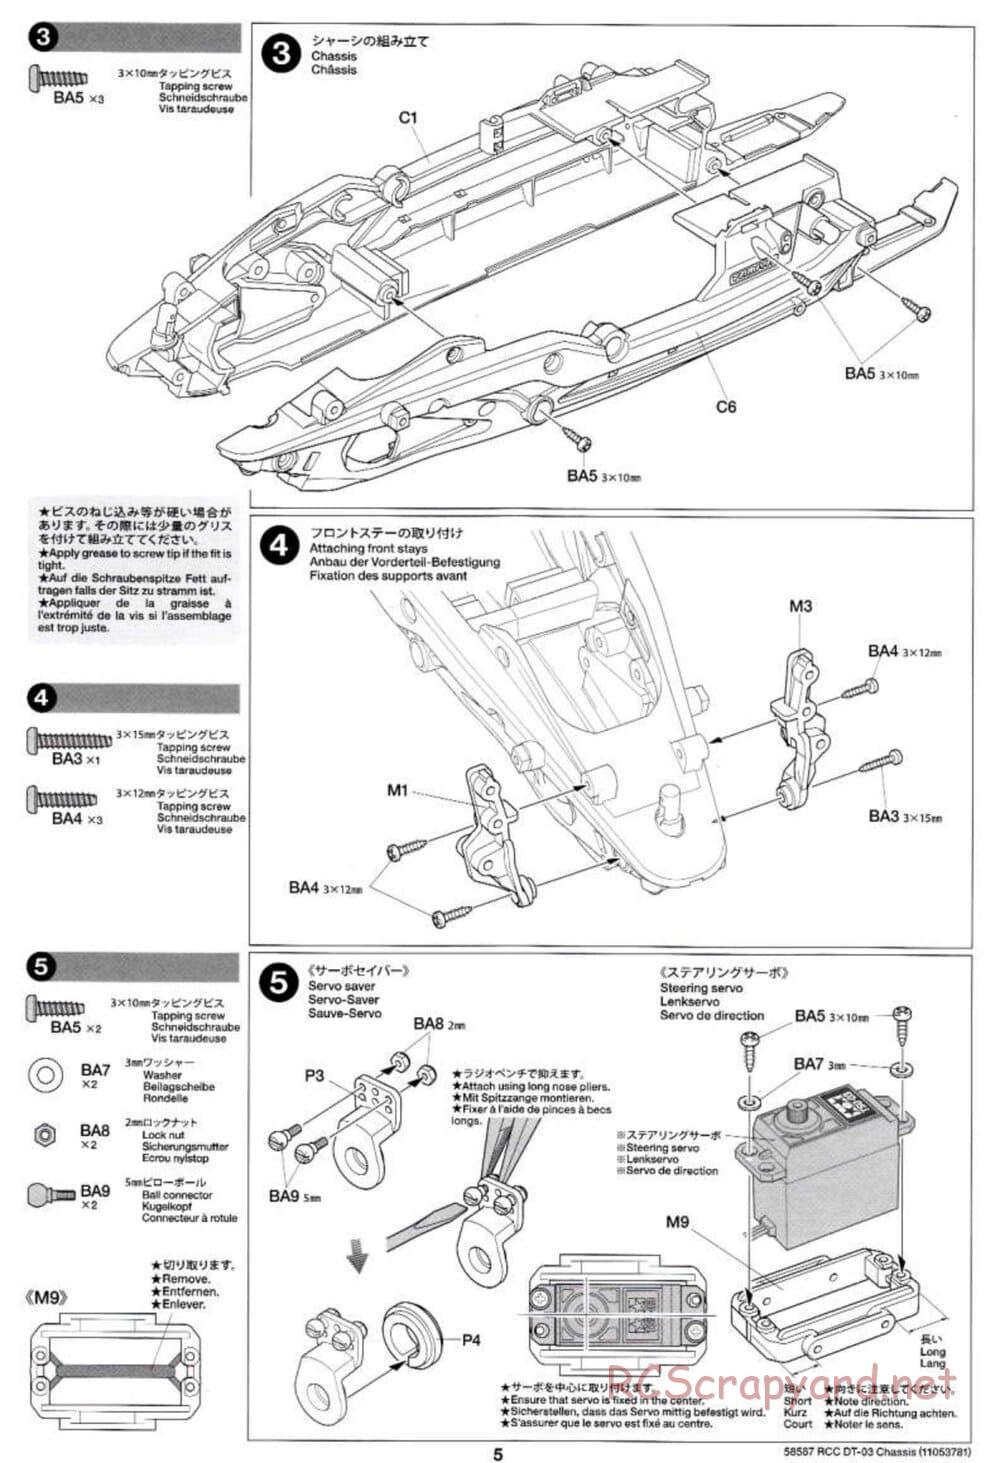 Tamiya - Neo Fighter Buggy Chassis - Manual - Page 5